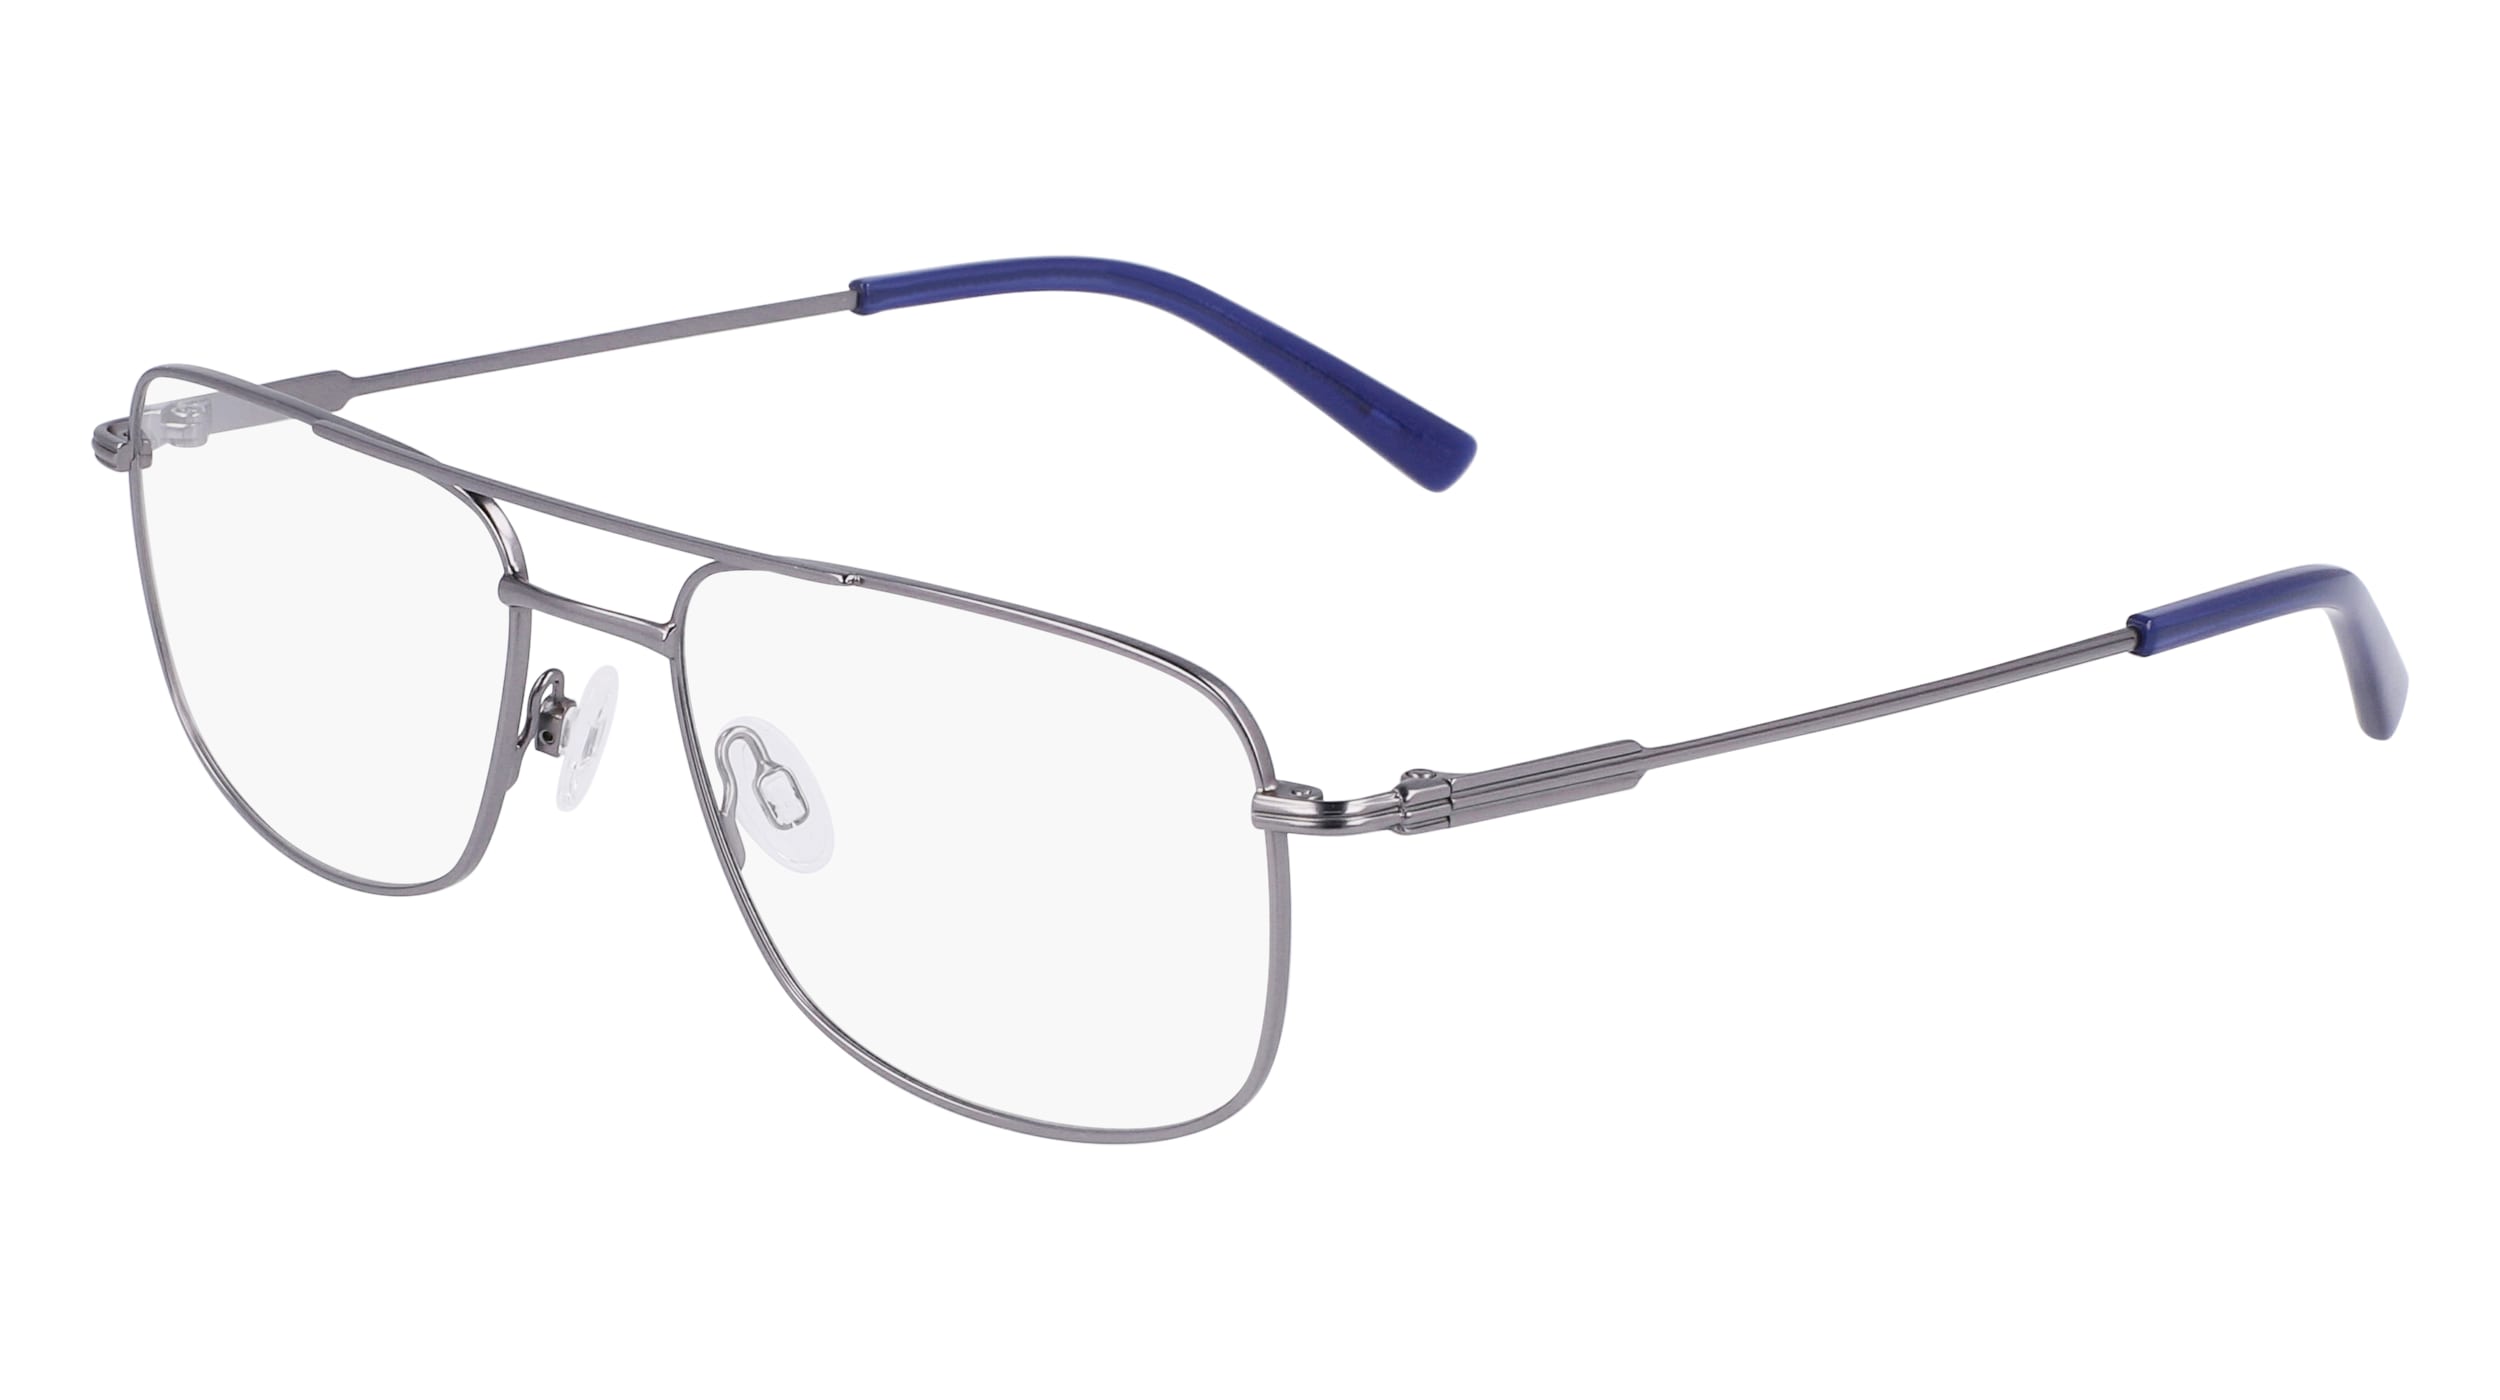 Browse VSP's Frame Gallery & Find Glasses that Fit Your Style